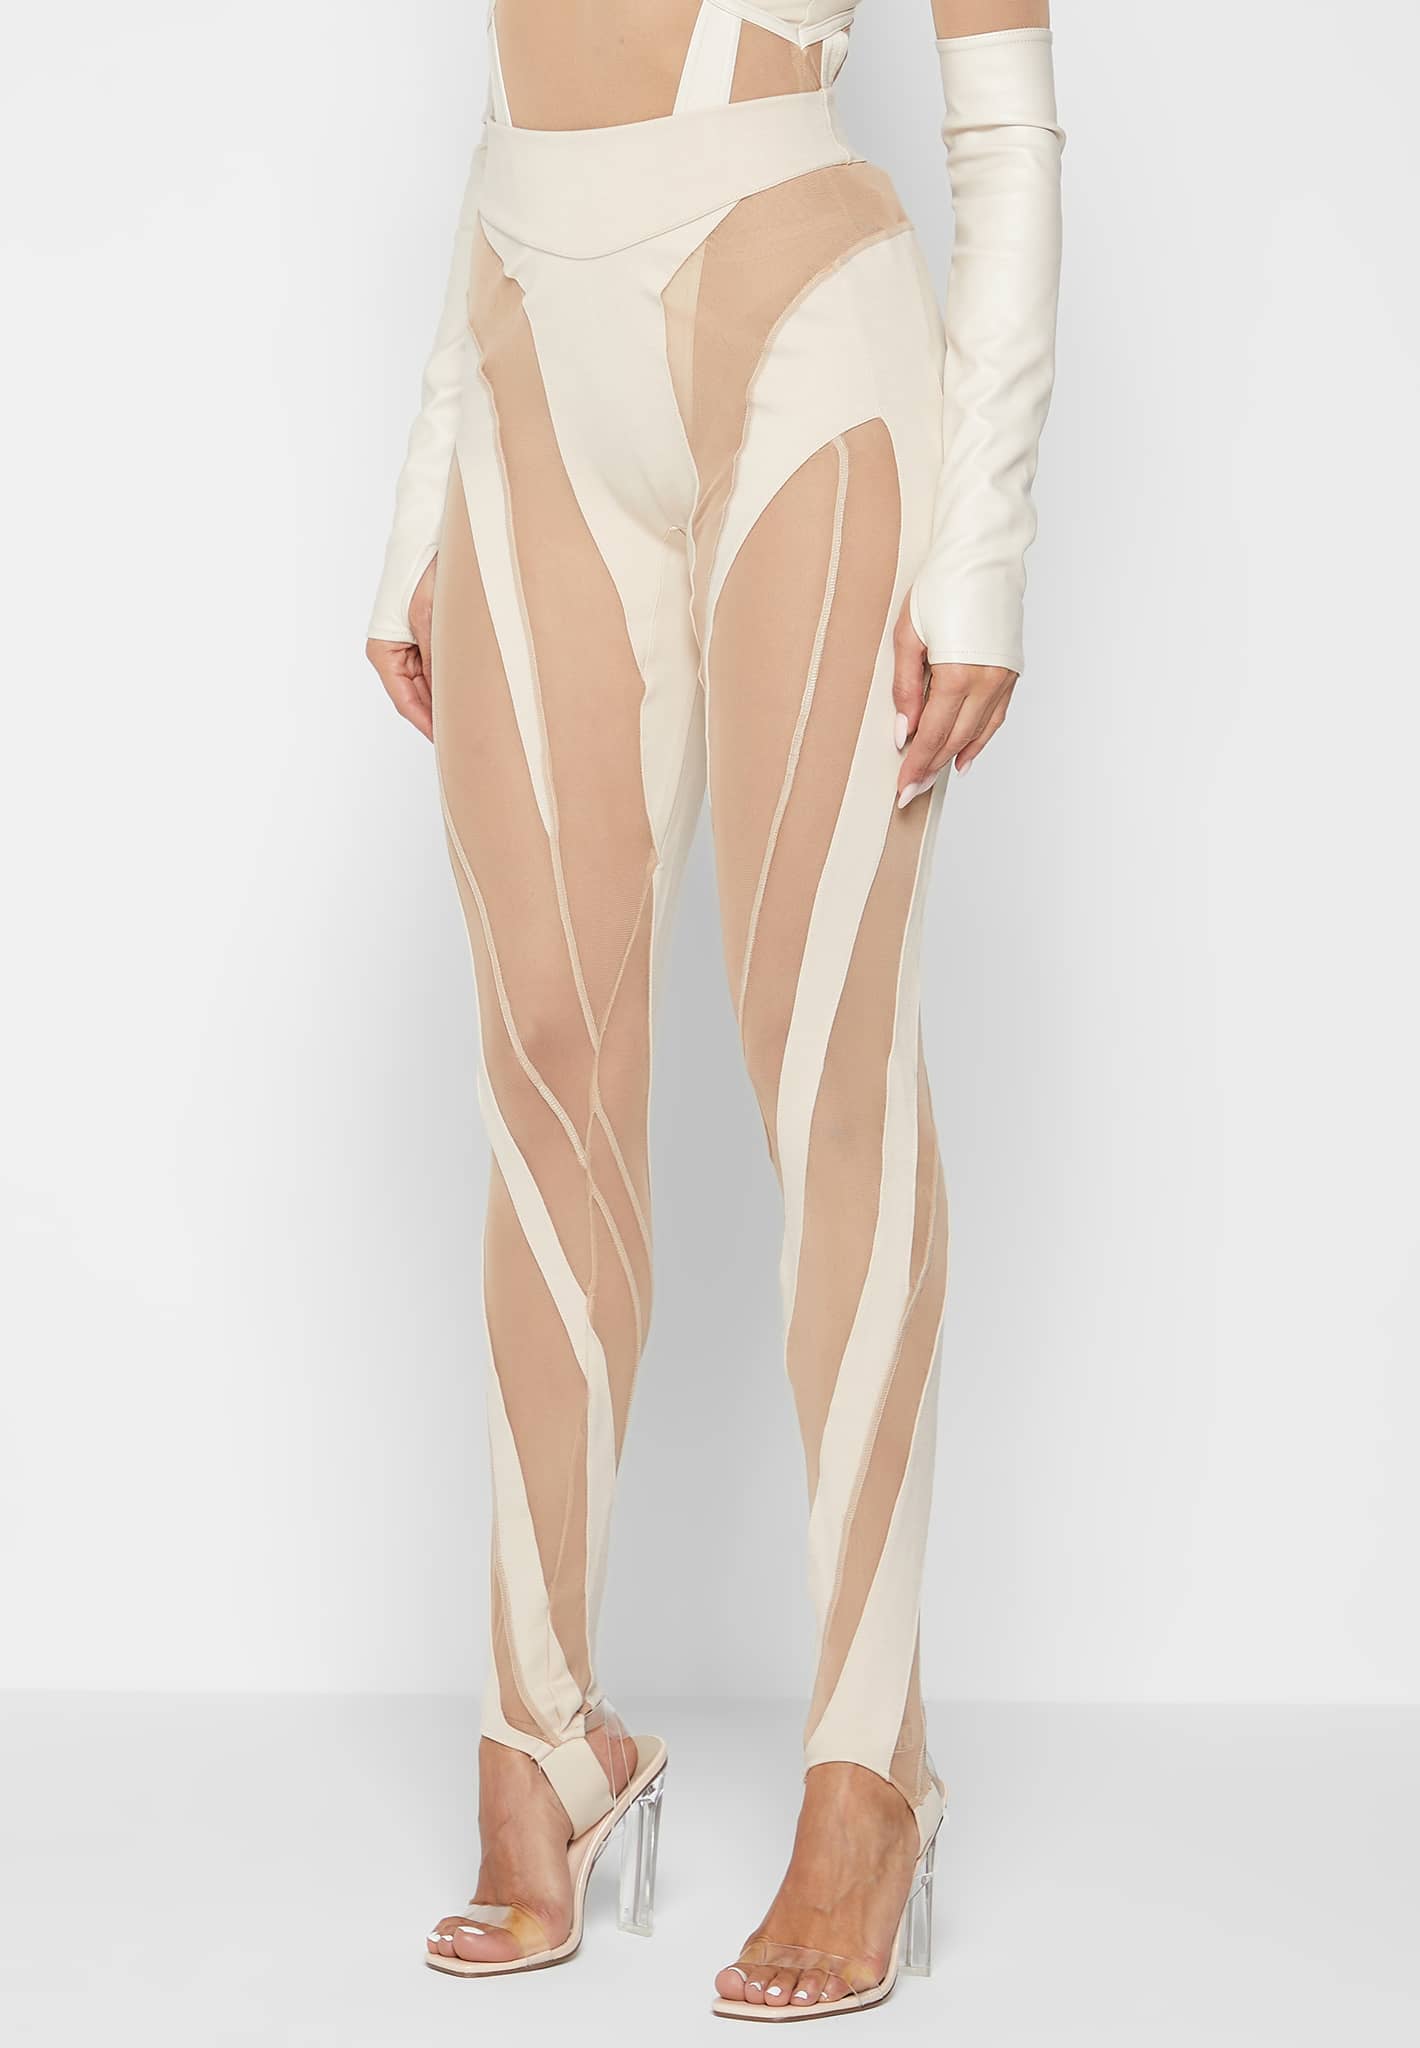 Looking for a dupe of these Mugler Leggings! : r/findfashion